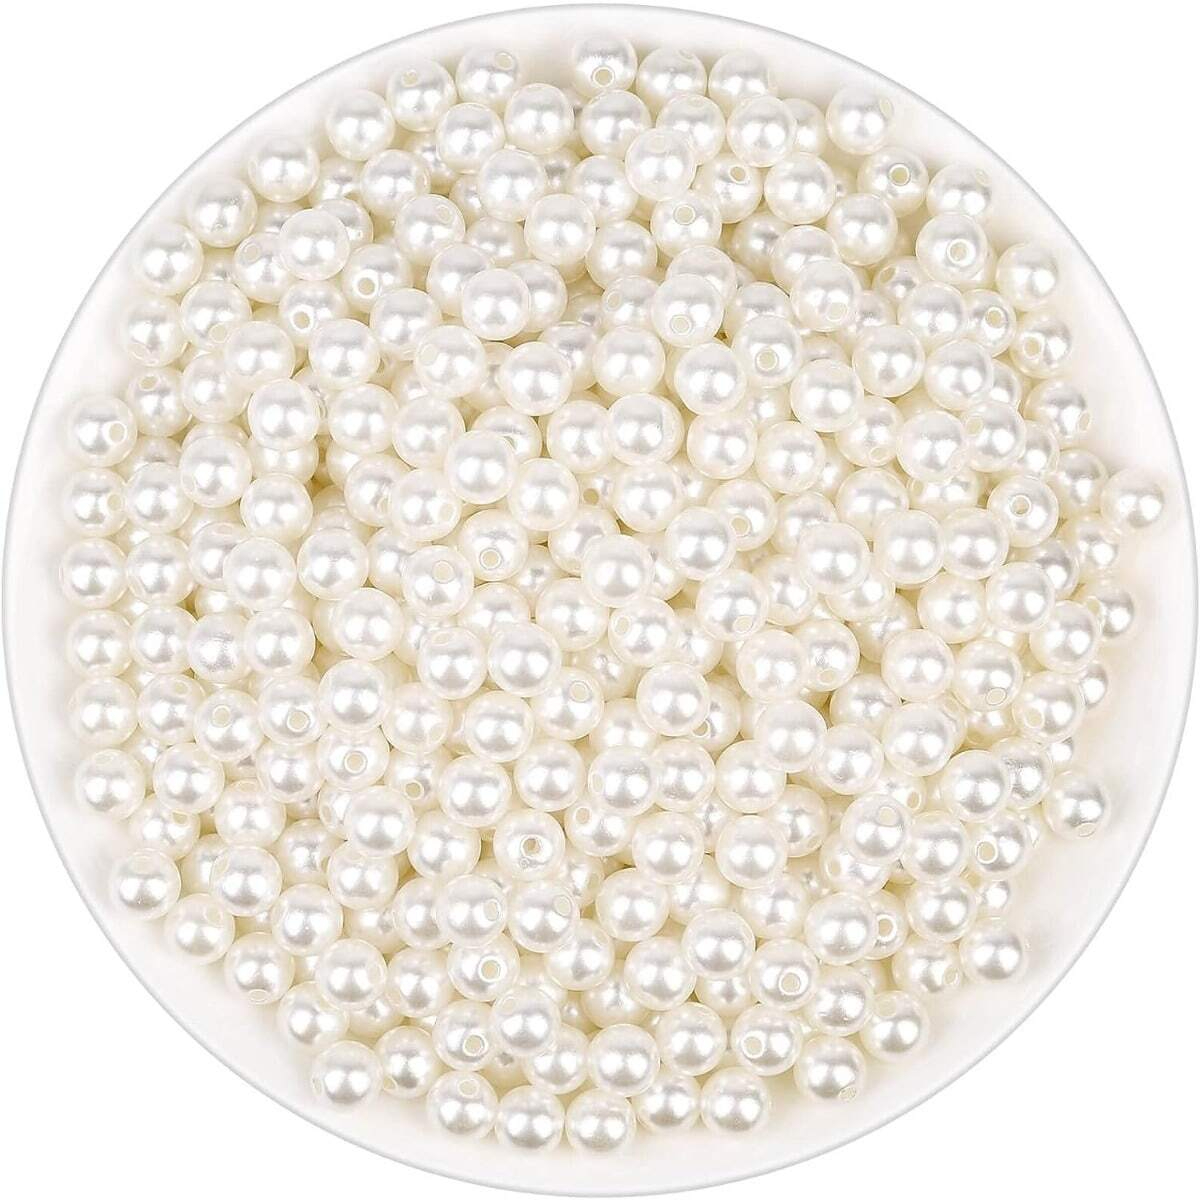 200pcs Sewing Pearl Beads , Sew on Pearls for Clothes, Crafts Pearls with Gold Claw, Half Round Sew on Beads White Pearls (Gold Claw, 10mm 200pcs)